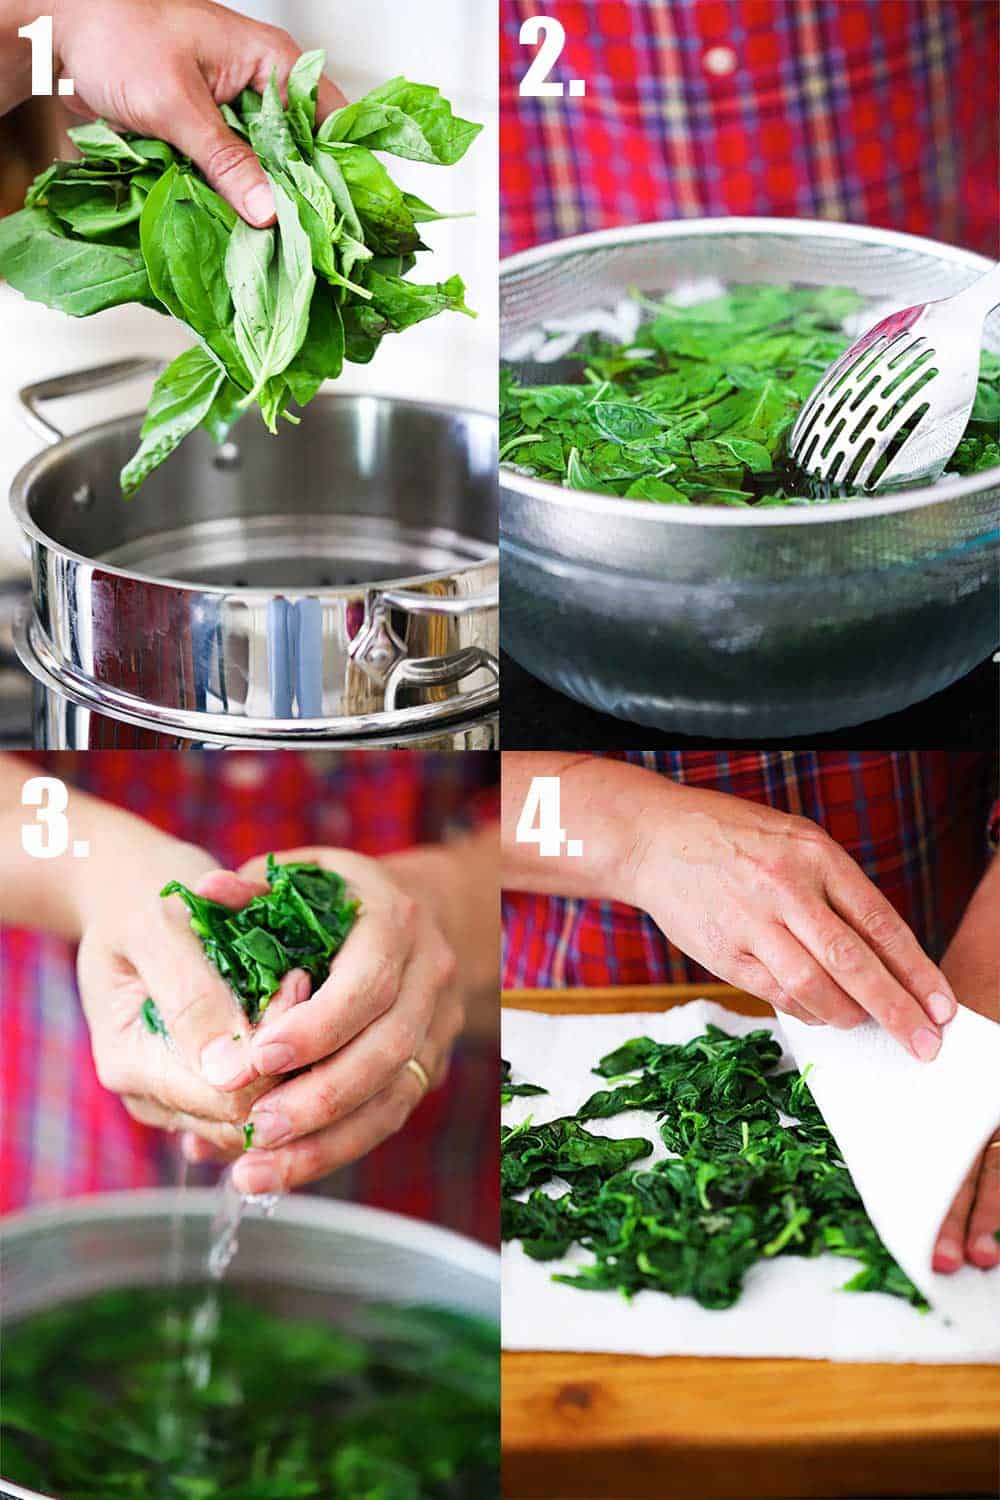 4 shots: 1st hand dropping basil into a pot of boiling water, 2nd basil in a ice bath, 3rd two hands squeezing our excess water from blanched basil, 4th, two hands drying the blanched basil in paper towels.